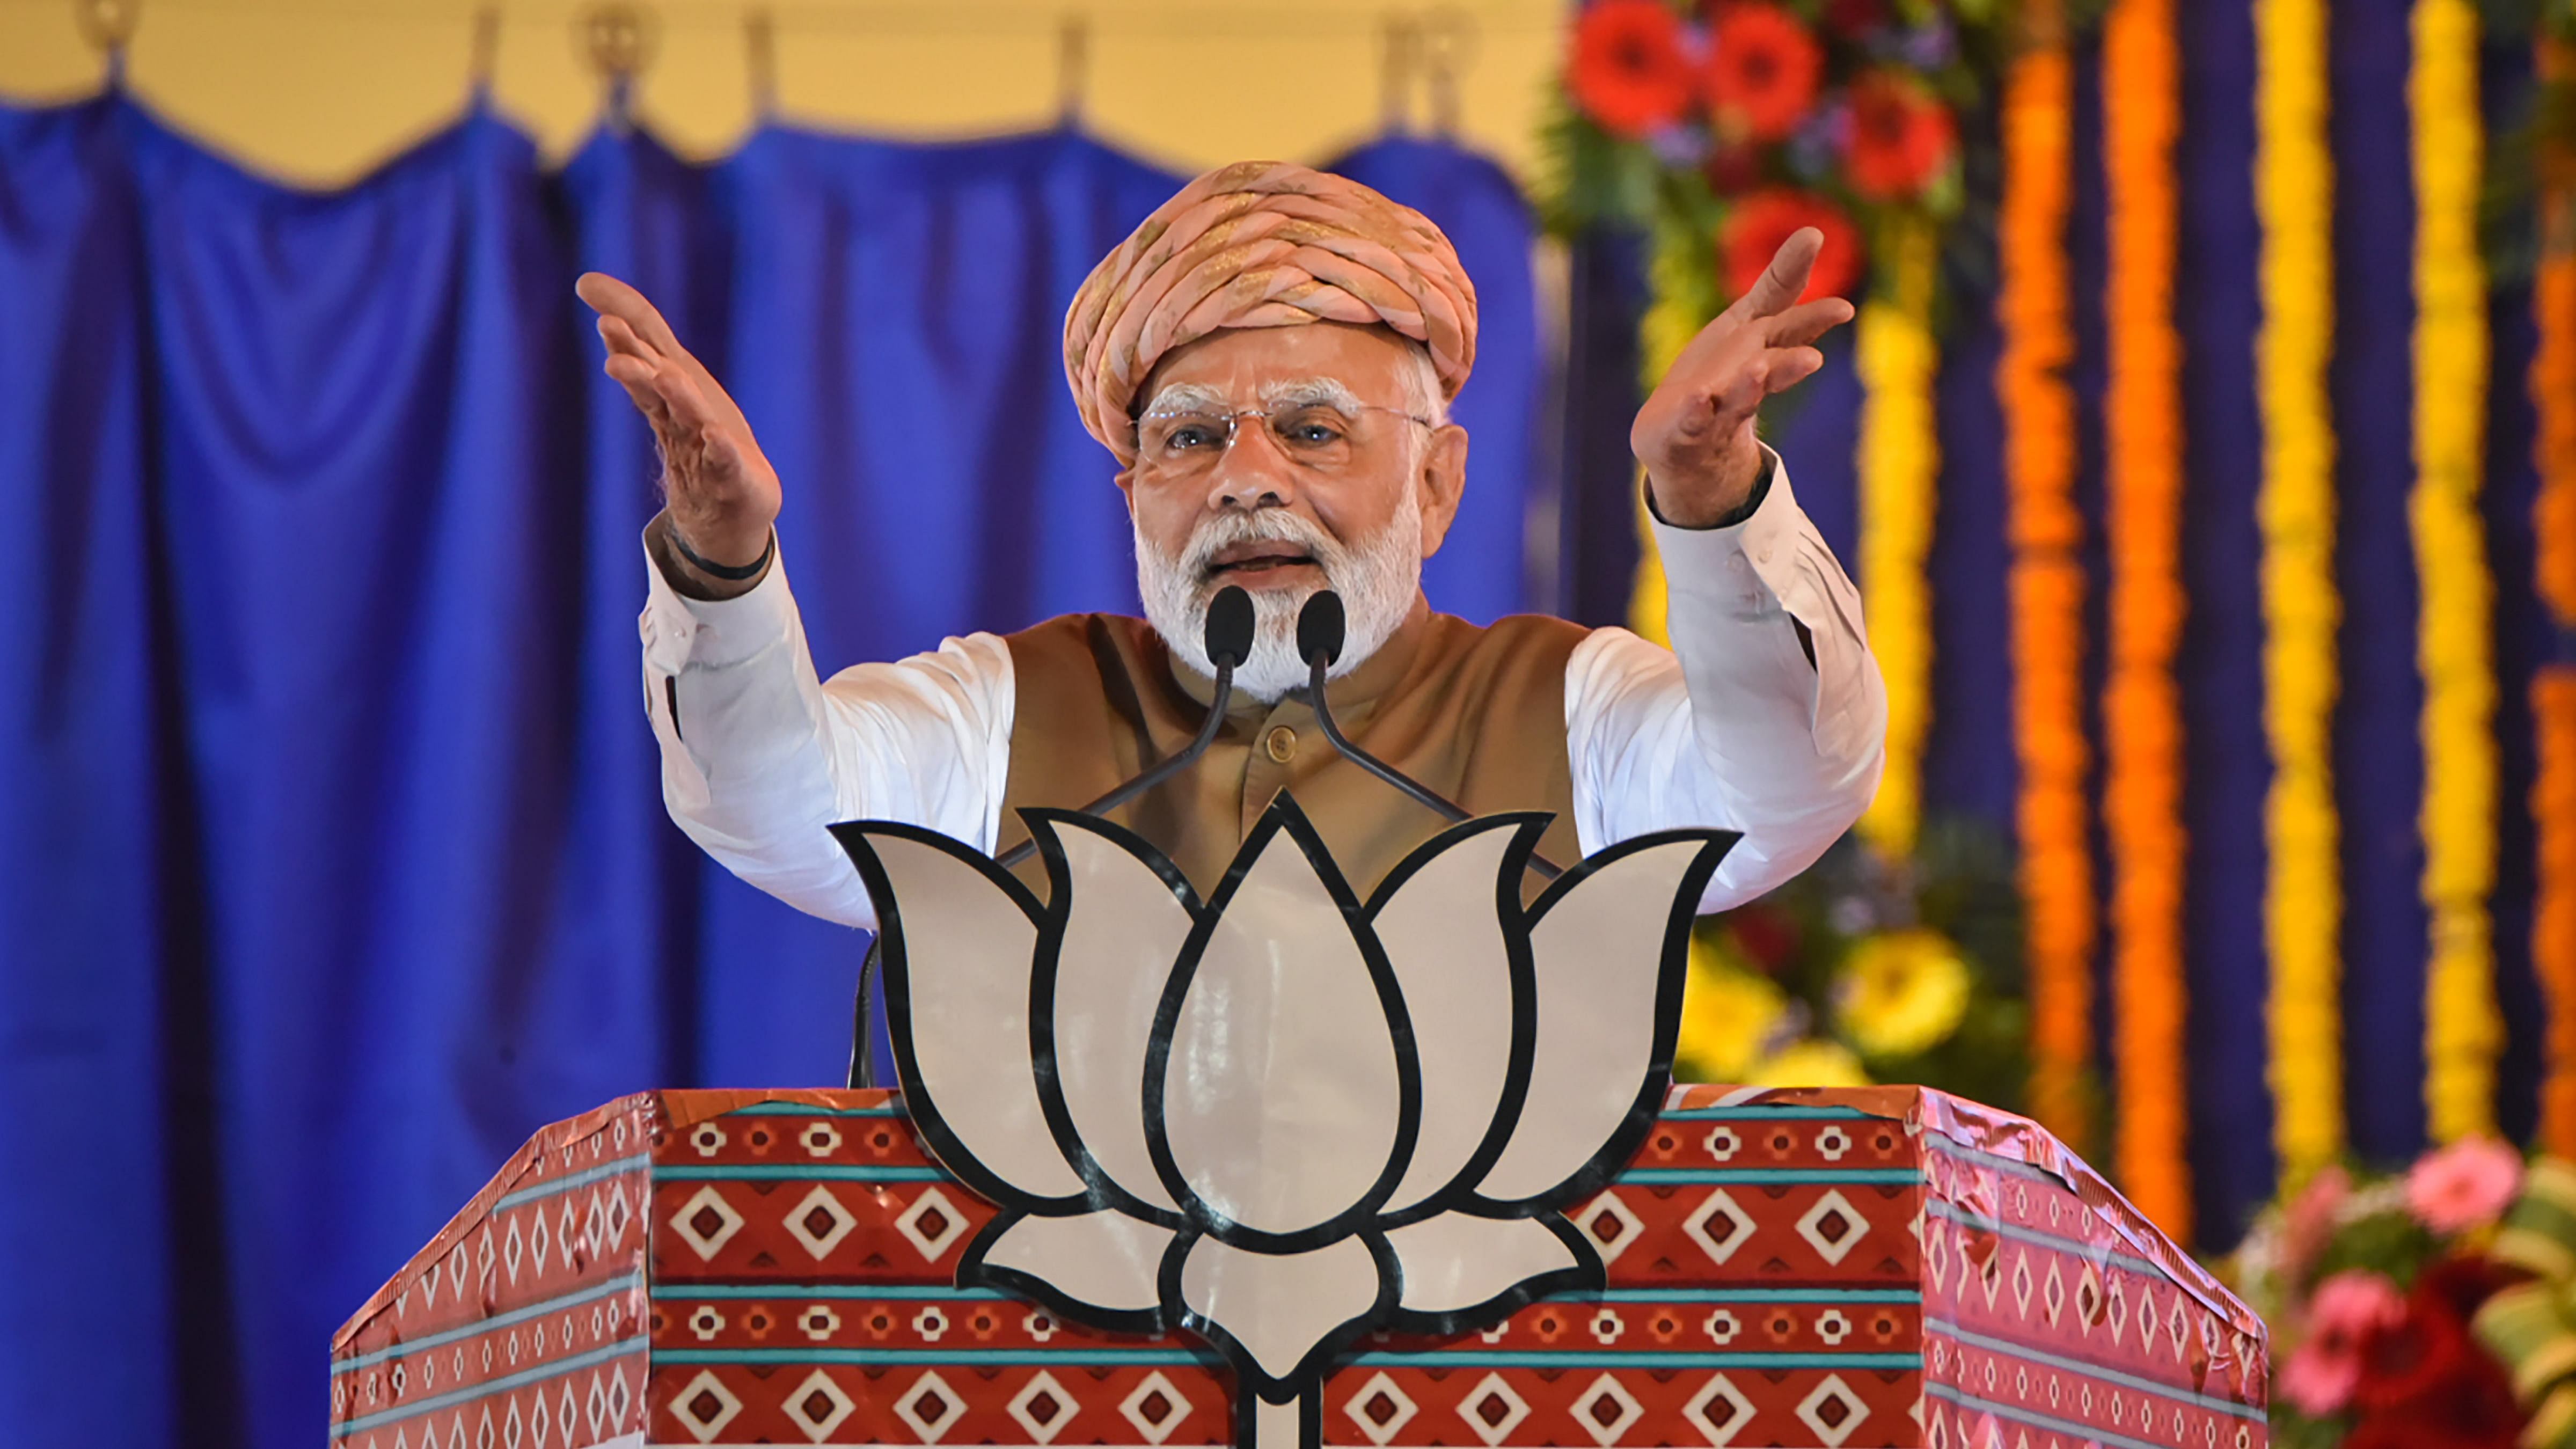 Prime Minister Narendra Modi speaks during a public meeting ahead of Gujarat Assembly elections, in Rajkot. Credit: PTI Photo